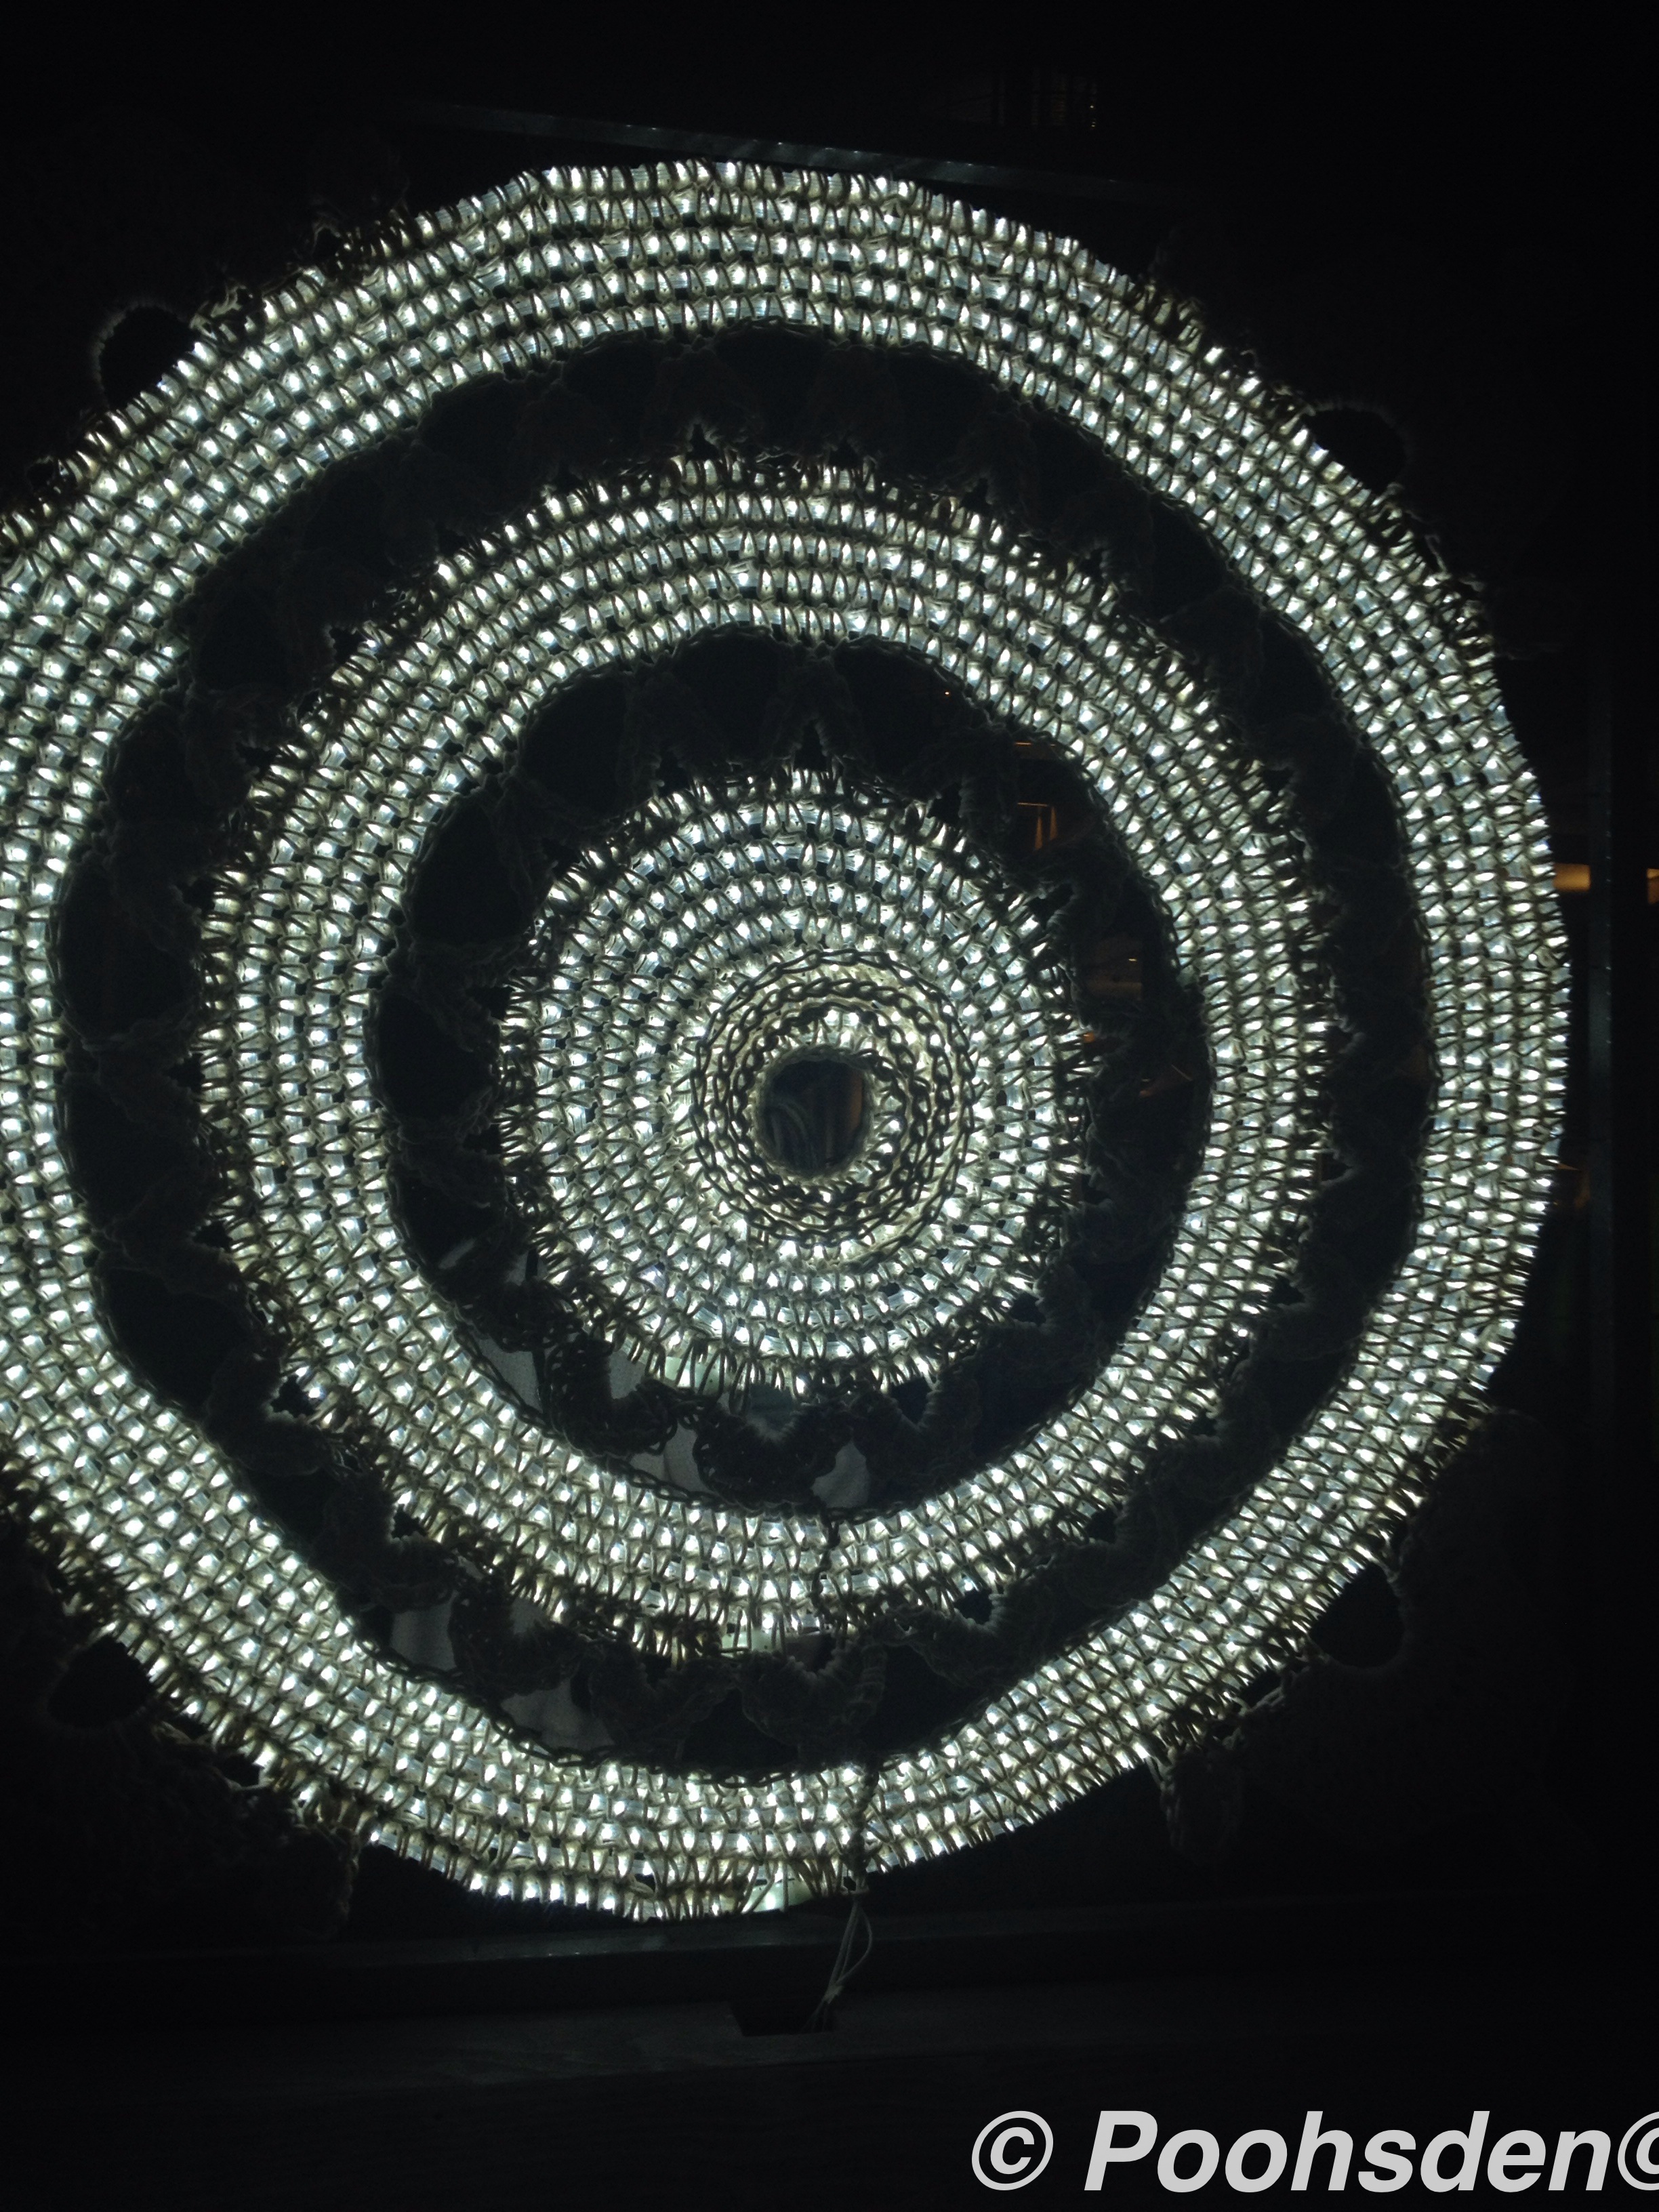 That is a crochet doily all lit up - beautiful isn't it? 